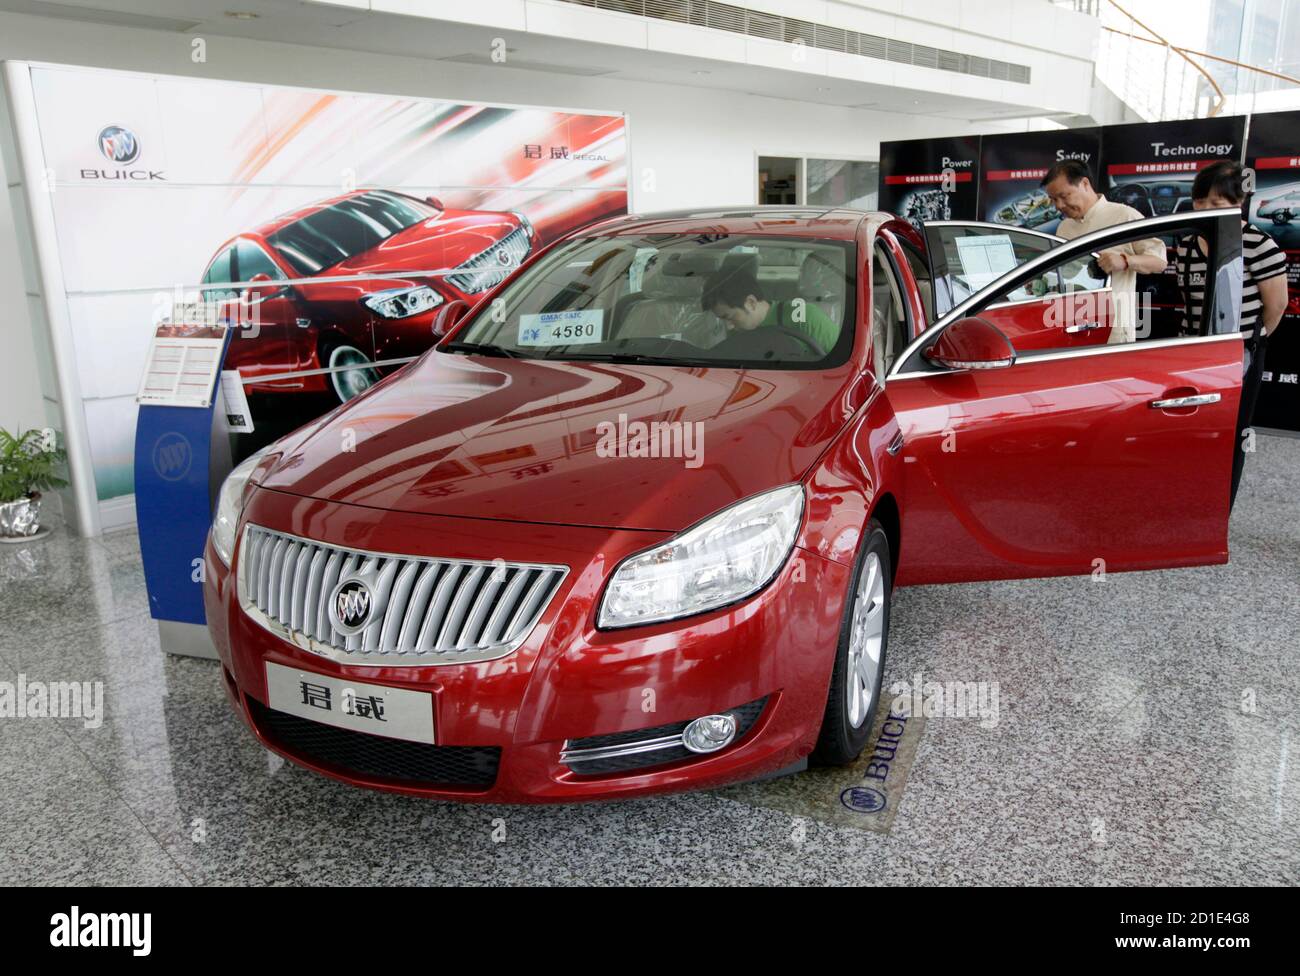 Customers look at a Buick Regal car at a General Motors auto dealership in Shanghai May 29, 2009. GM is facing imminent bankruptcy in the United States after bondholders rejected a debt-for-equity swap, a key part of the restructuring plan it needs to complete before a June 1 deadline imposed by the administration of President Barack Obama. Its China division, primarily two ventures with SAIC Motor, is profitable and self-sufficient, and able to fund its own daily operations and expansion, executives say. REUTERS/Aly Song (CHINA TRANSPORT BUSINESS) Stock Photo